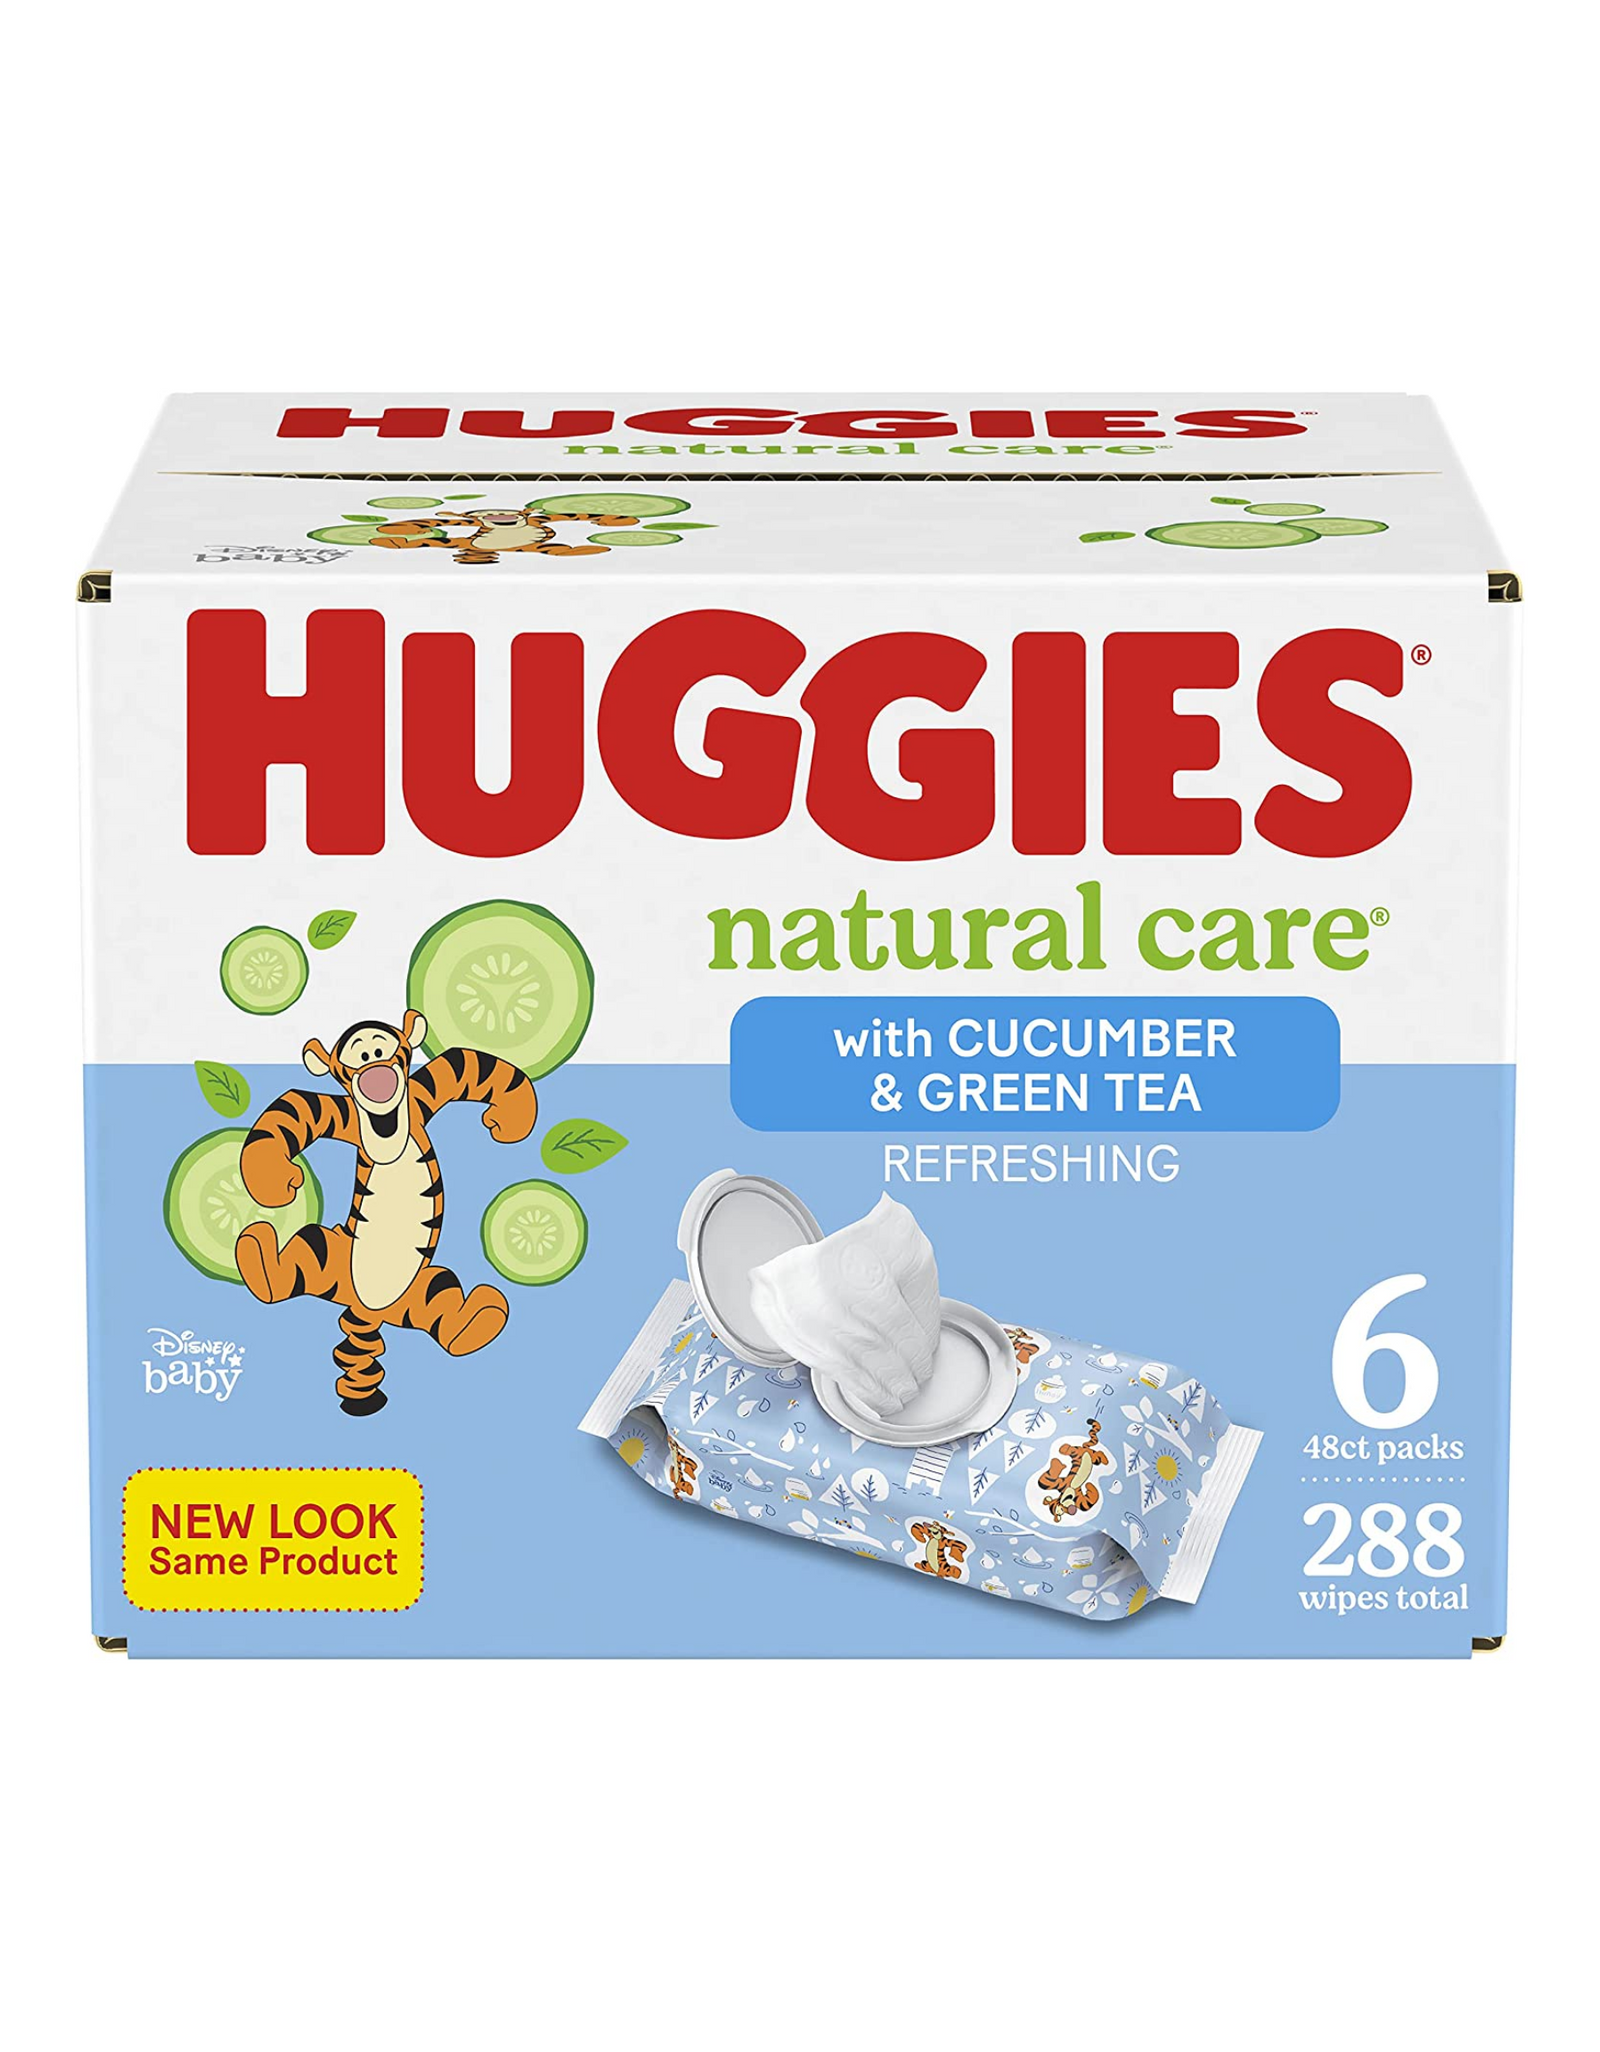 Baby Wipes, Huggies Natural Care Refreshing Baby Diaper Wipes, 288 Wipes Total (6 Packs)